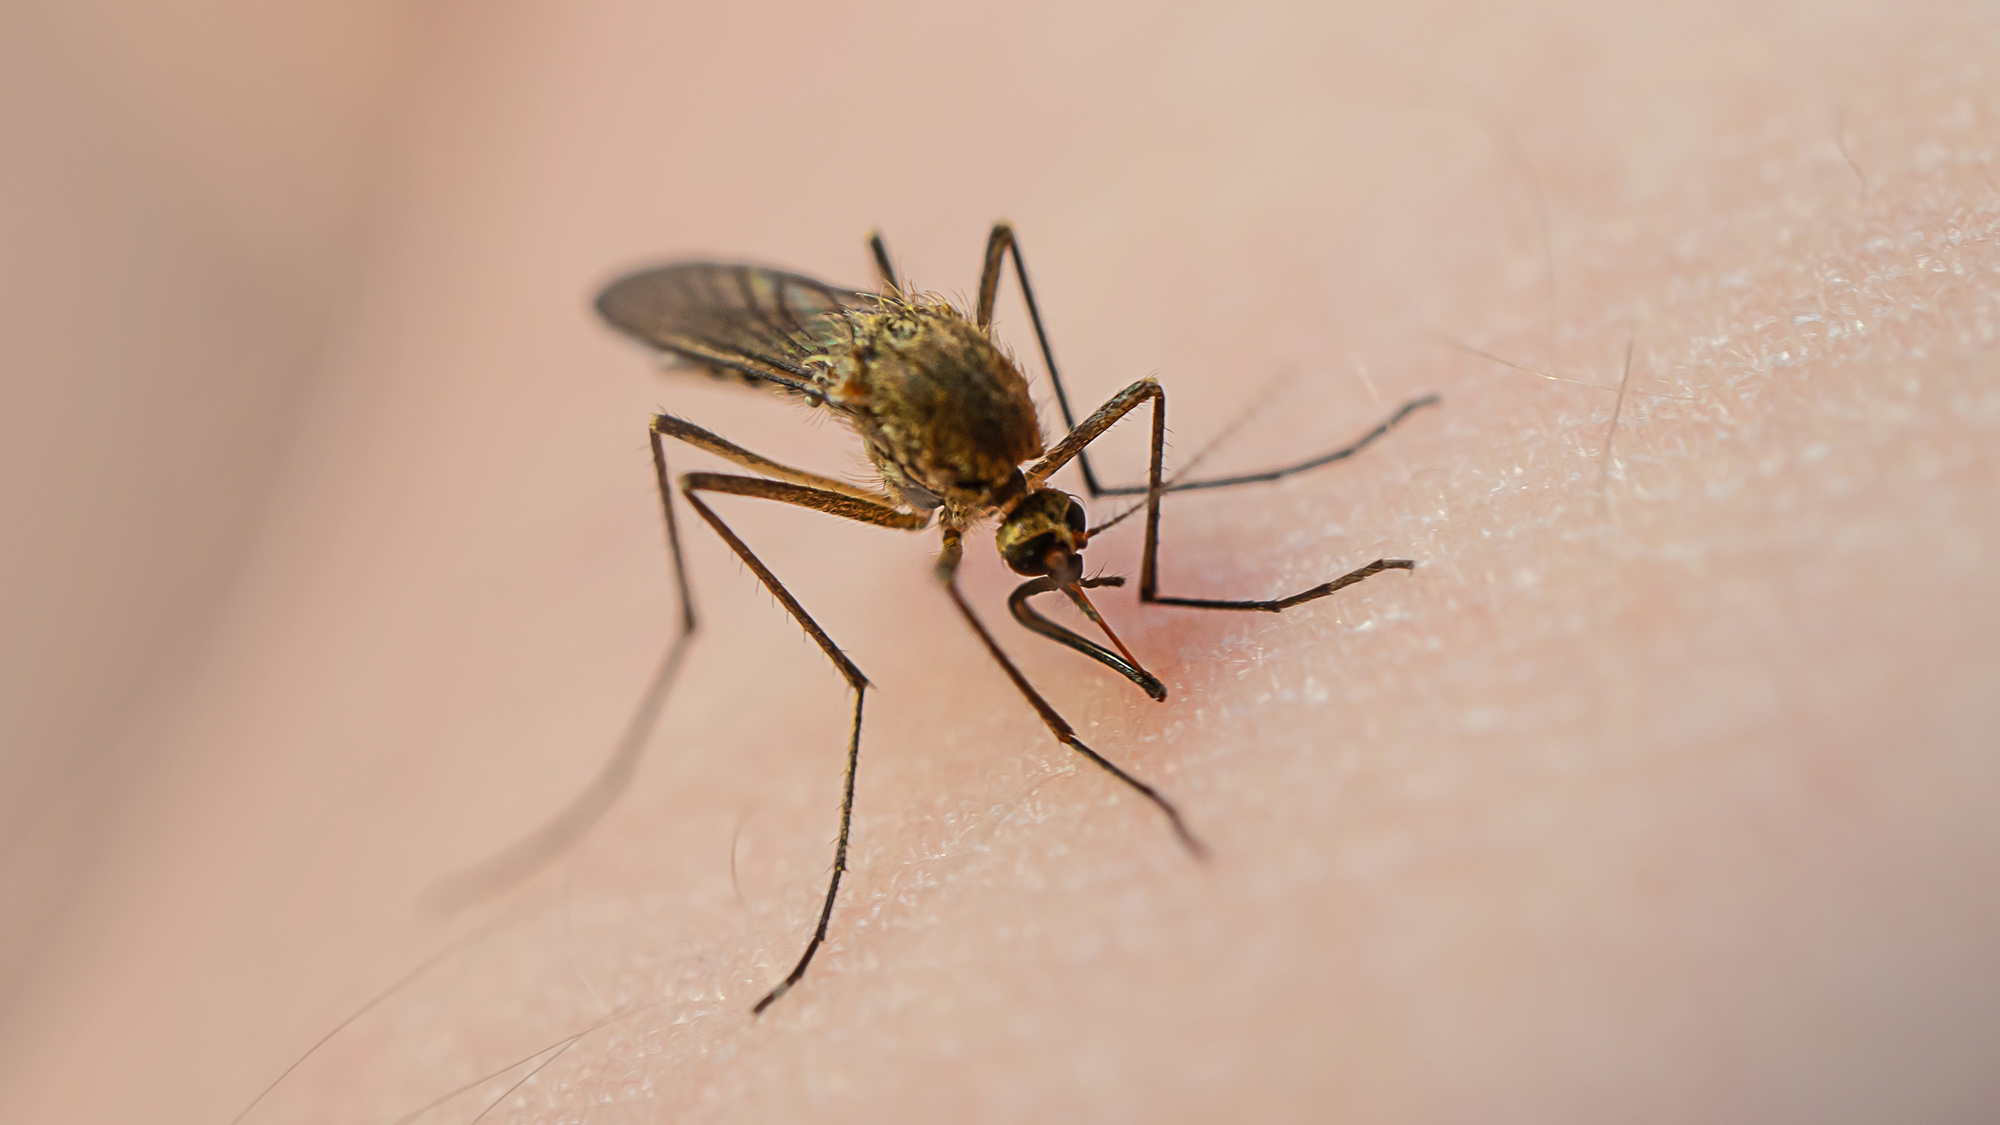 The University of Glasgow launched a new project to surveil mosquito activity in Scotland. 